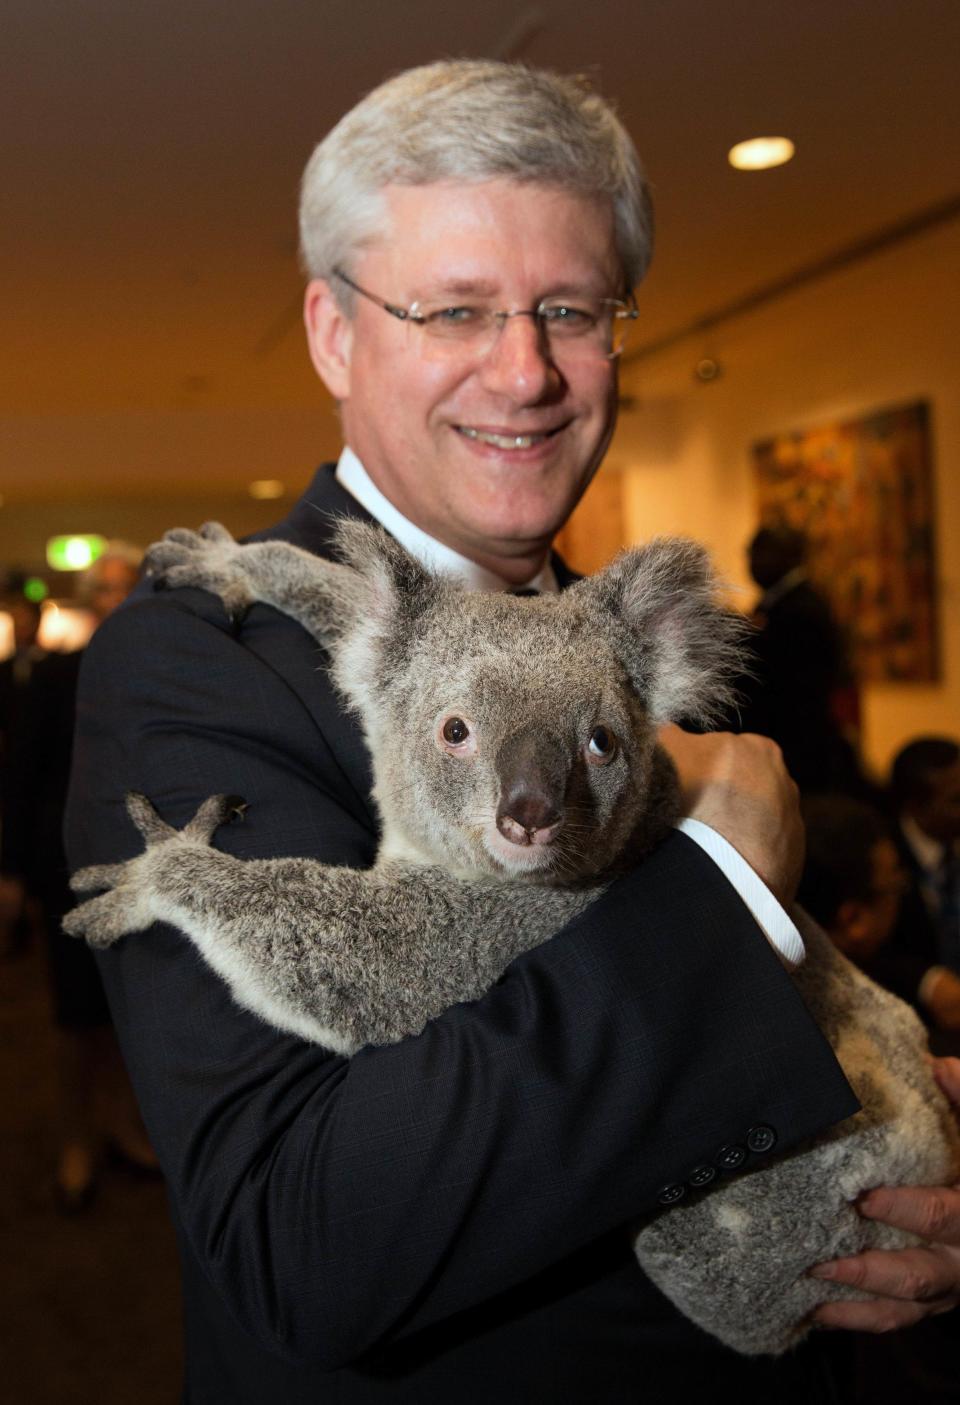 G20 handout photo shows Canada's PM Harper holding a koala before the G20 Leaders' Summit in Brisbane